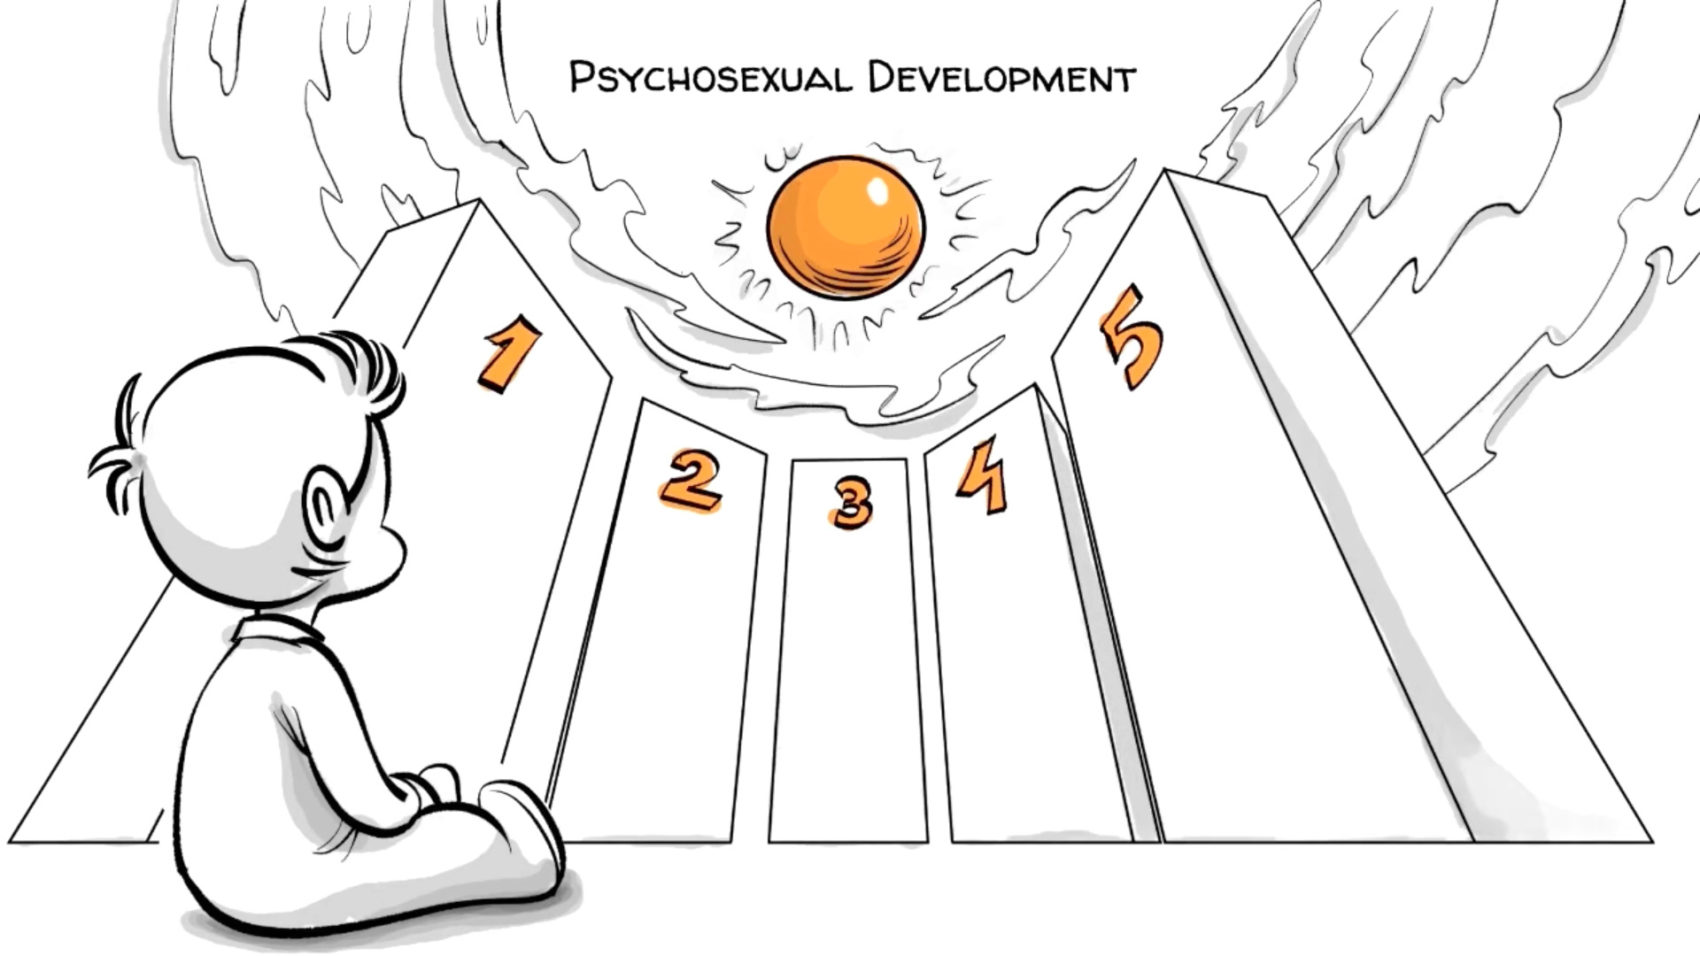 fixation in the oral stage of psychosexual development